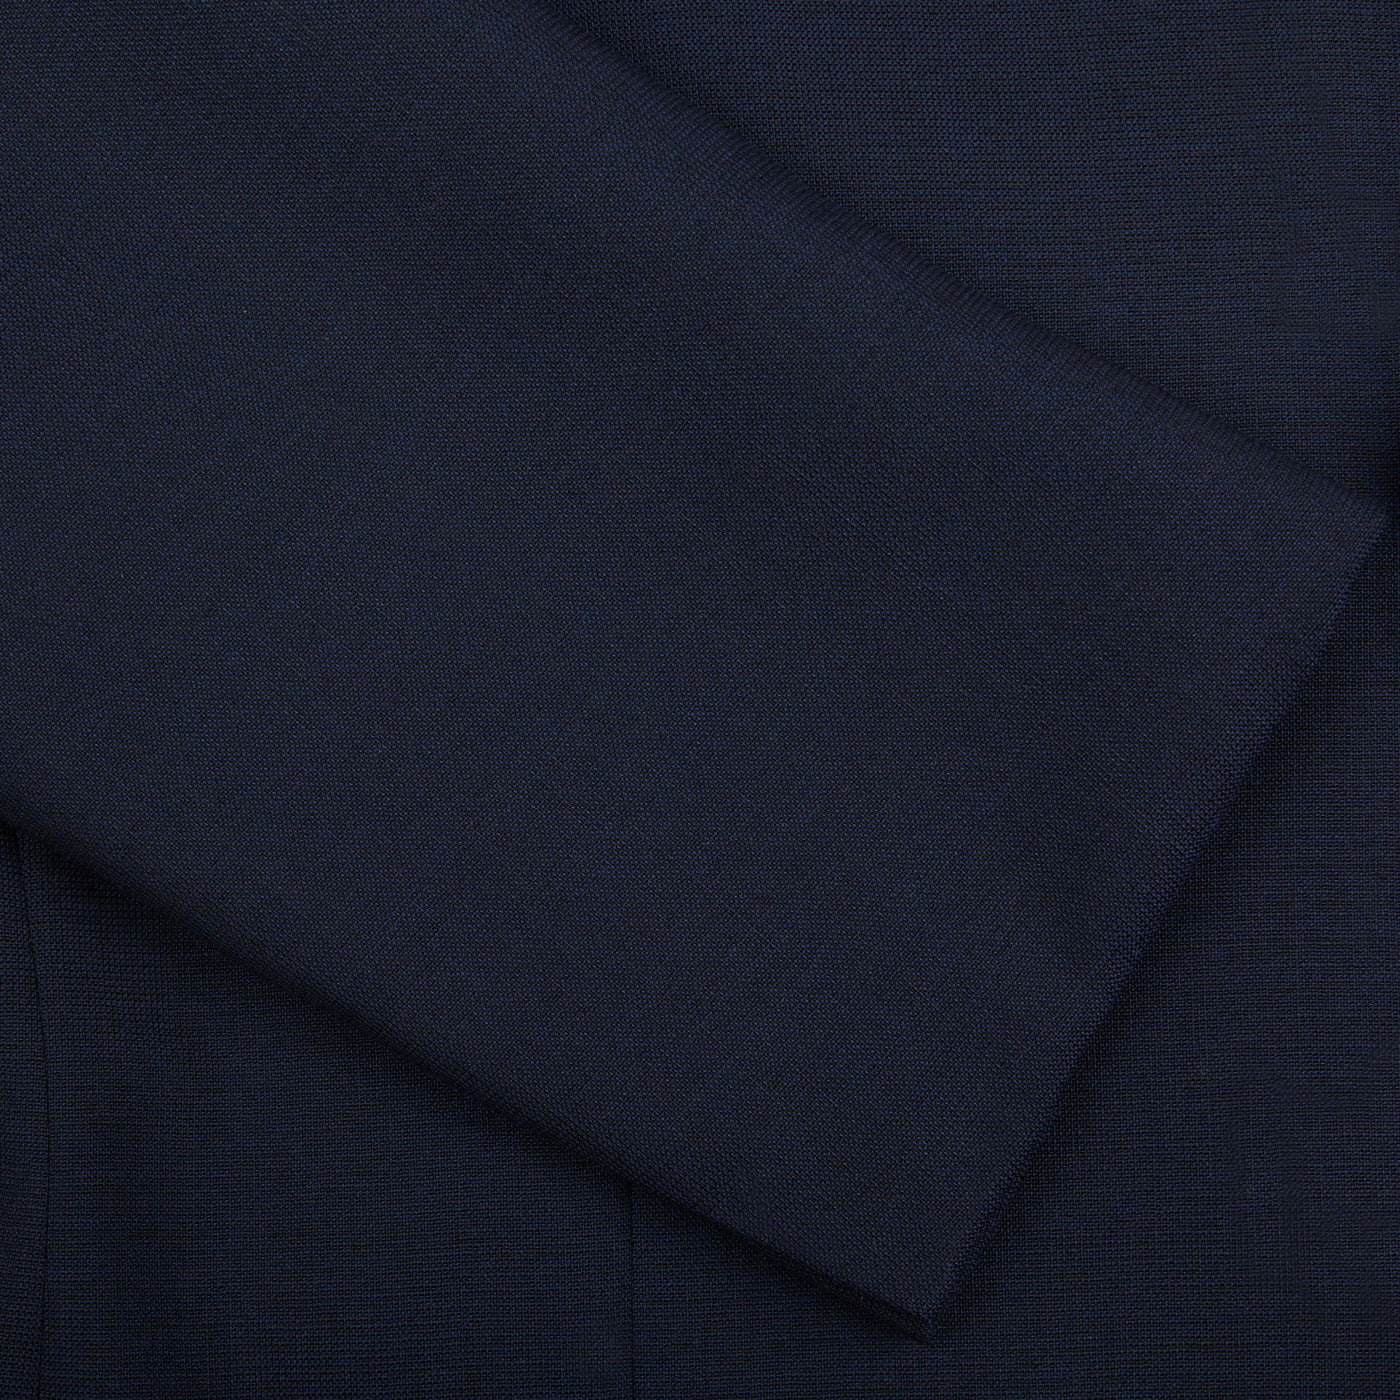 A close up of a Ring Jacket Navy High Twist Wool Suit made with fresco fabric.